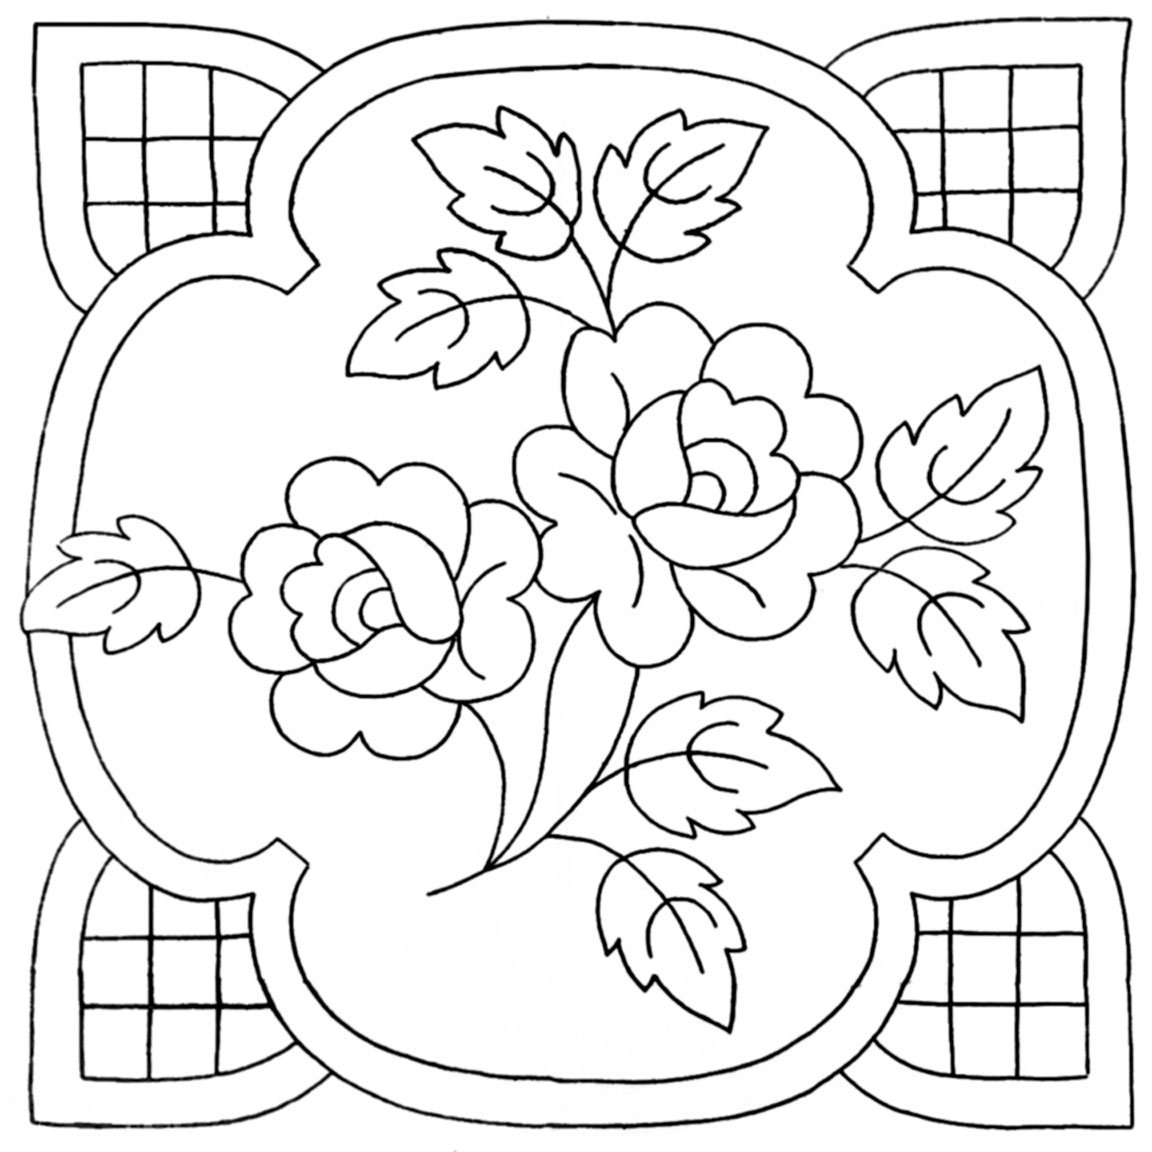 Transfer Embroidery Pattern Hand Quilting Designs From Vintage Embroidery Transfers Q Is For